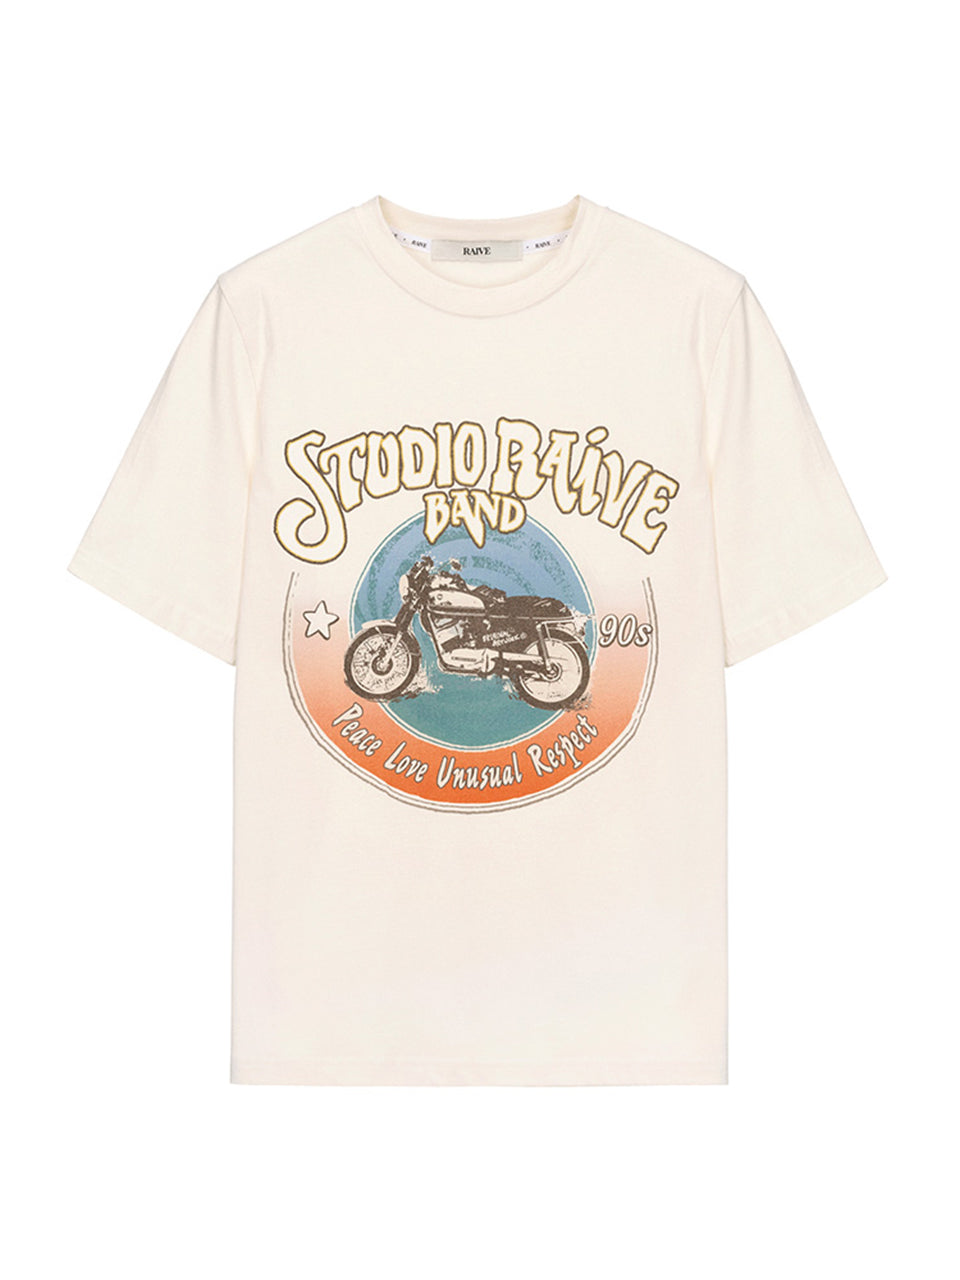 Bicycle Band T-Shirt in Cream